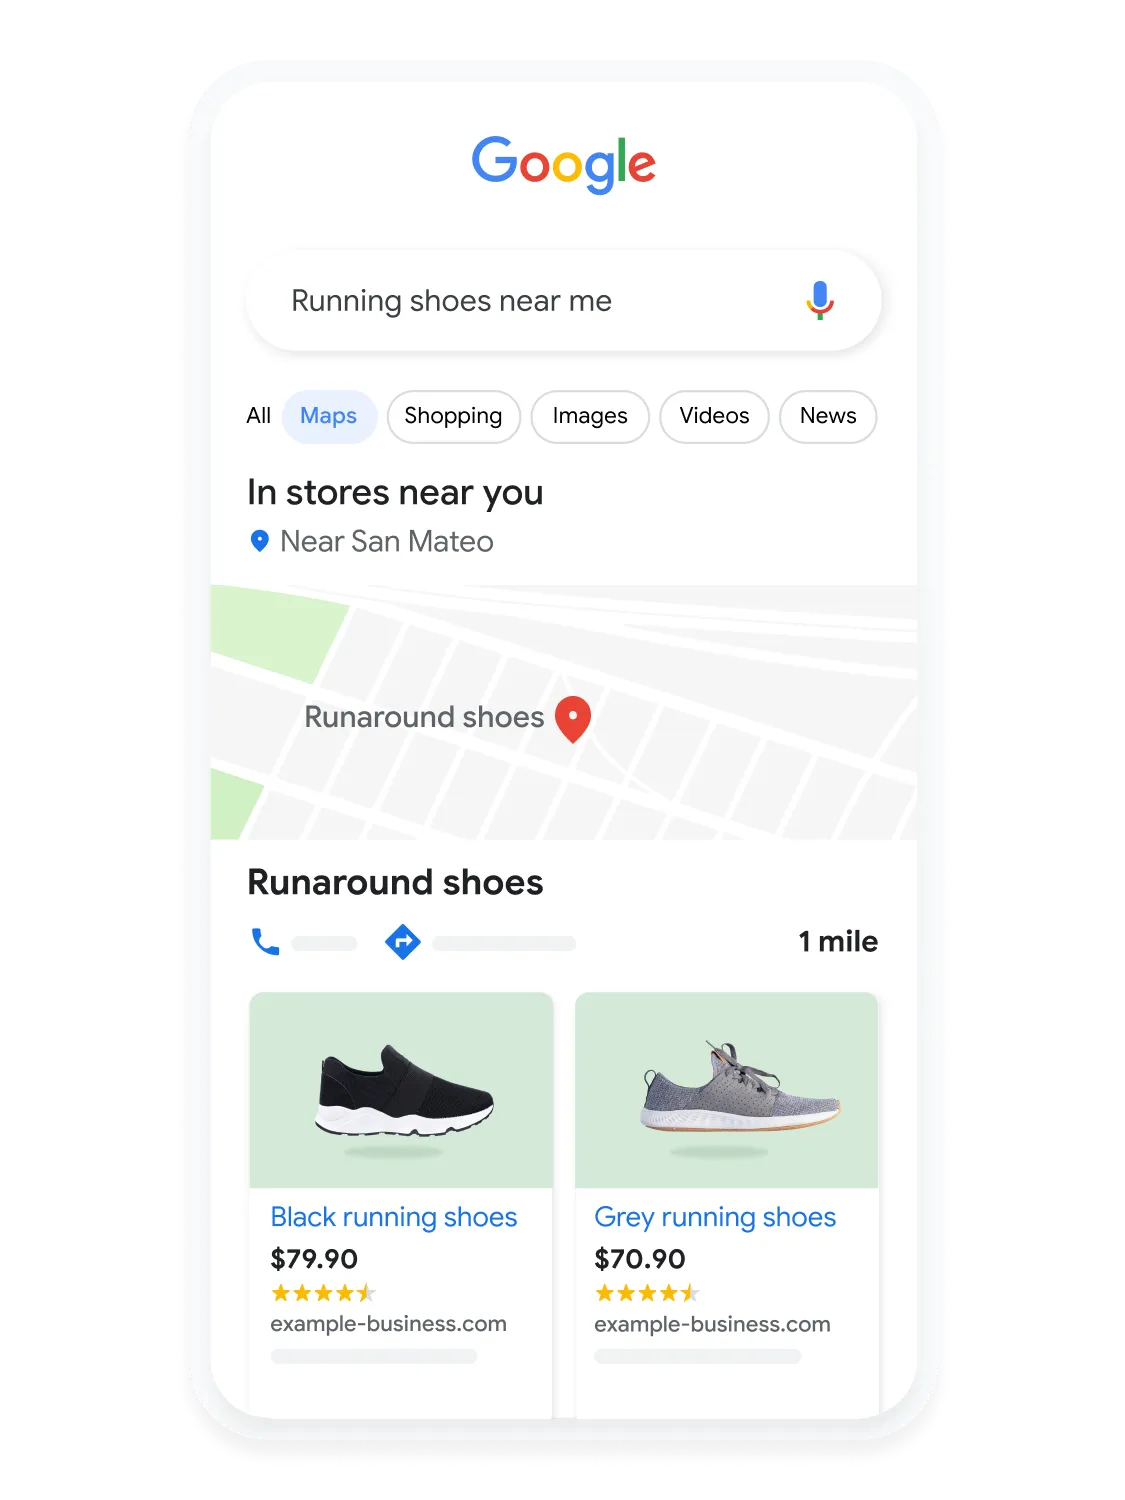 Mobile user interface animated to show a user searching for running shoes on Google Maps.